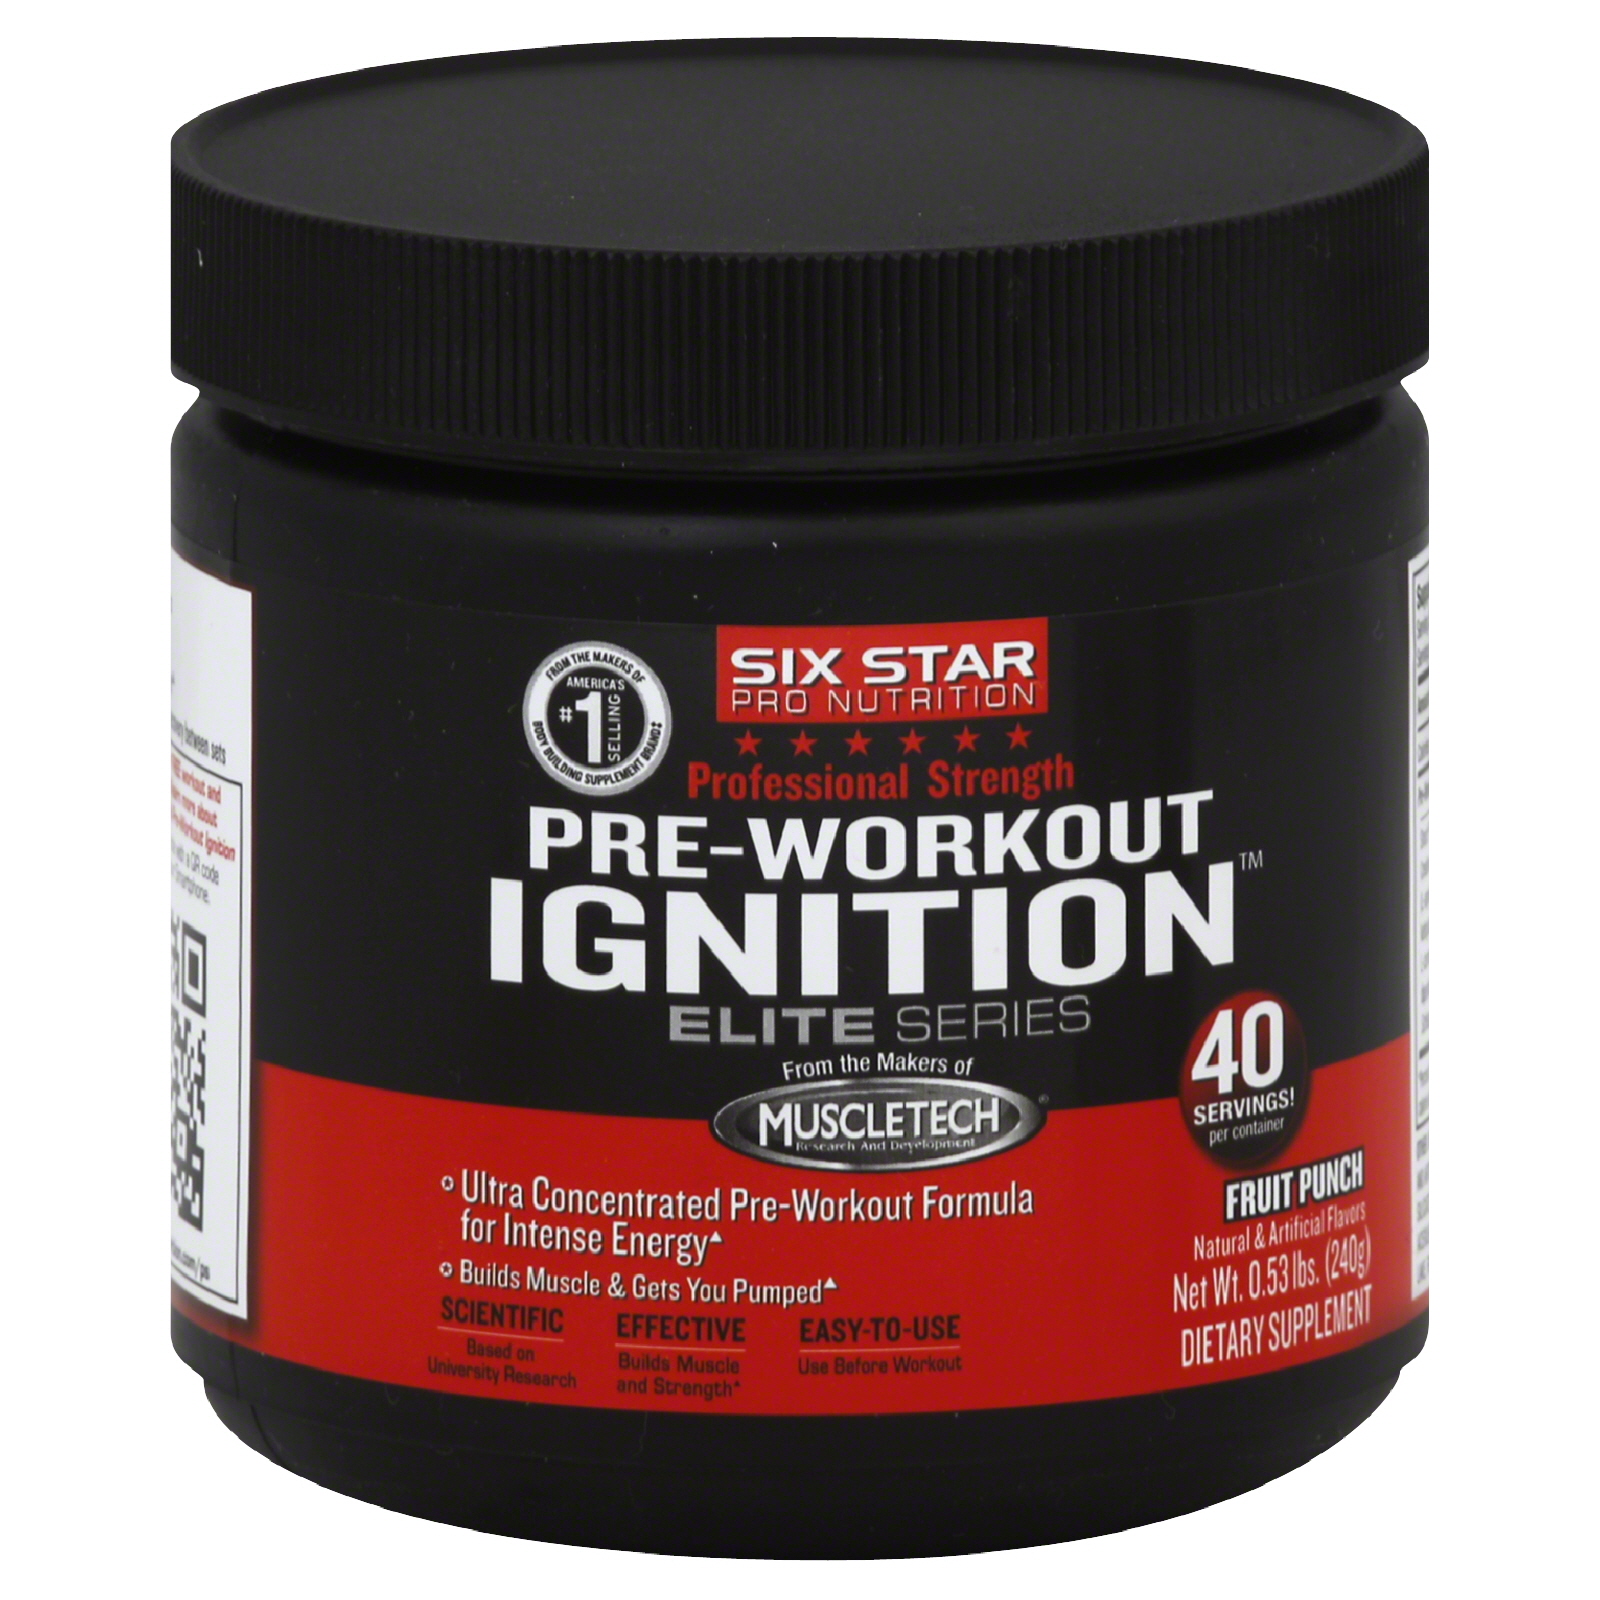 Six Star Pro Nutrition Elite Series Pre-Workout Ignition, Professional Strength, Fruit Punch, .53lb